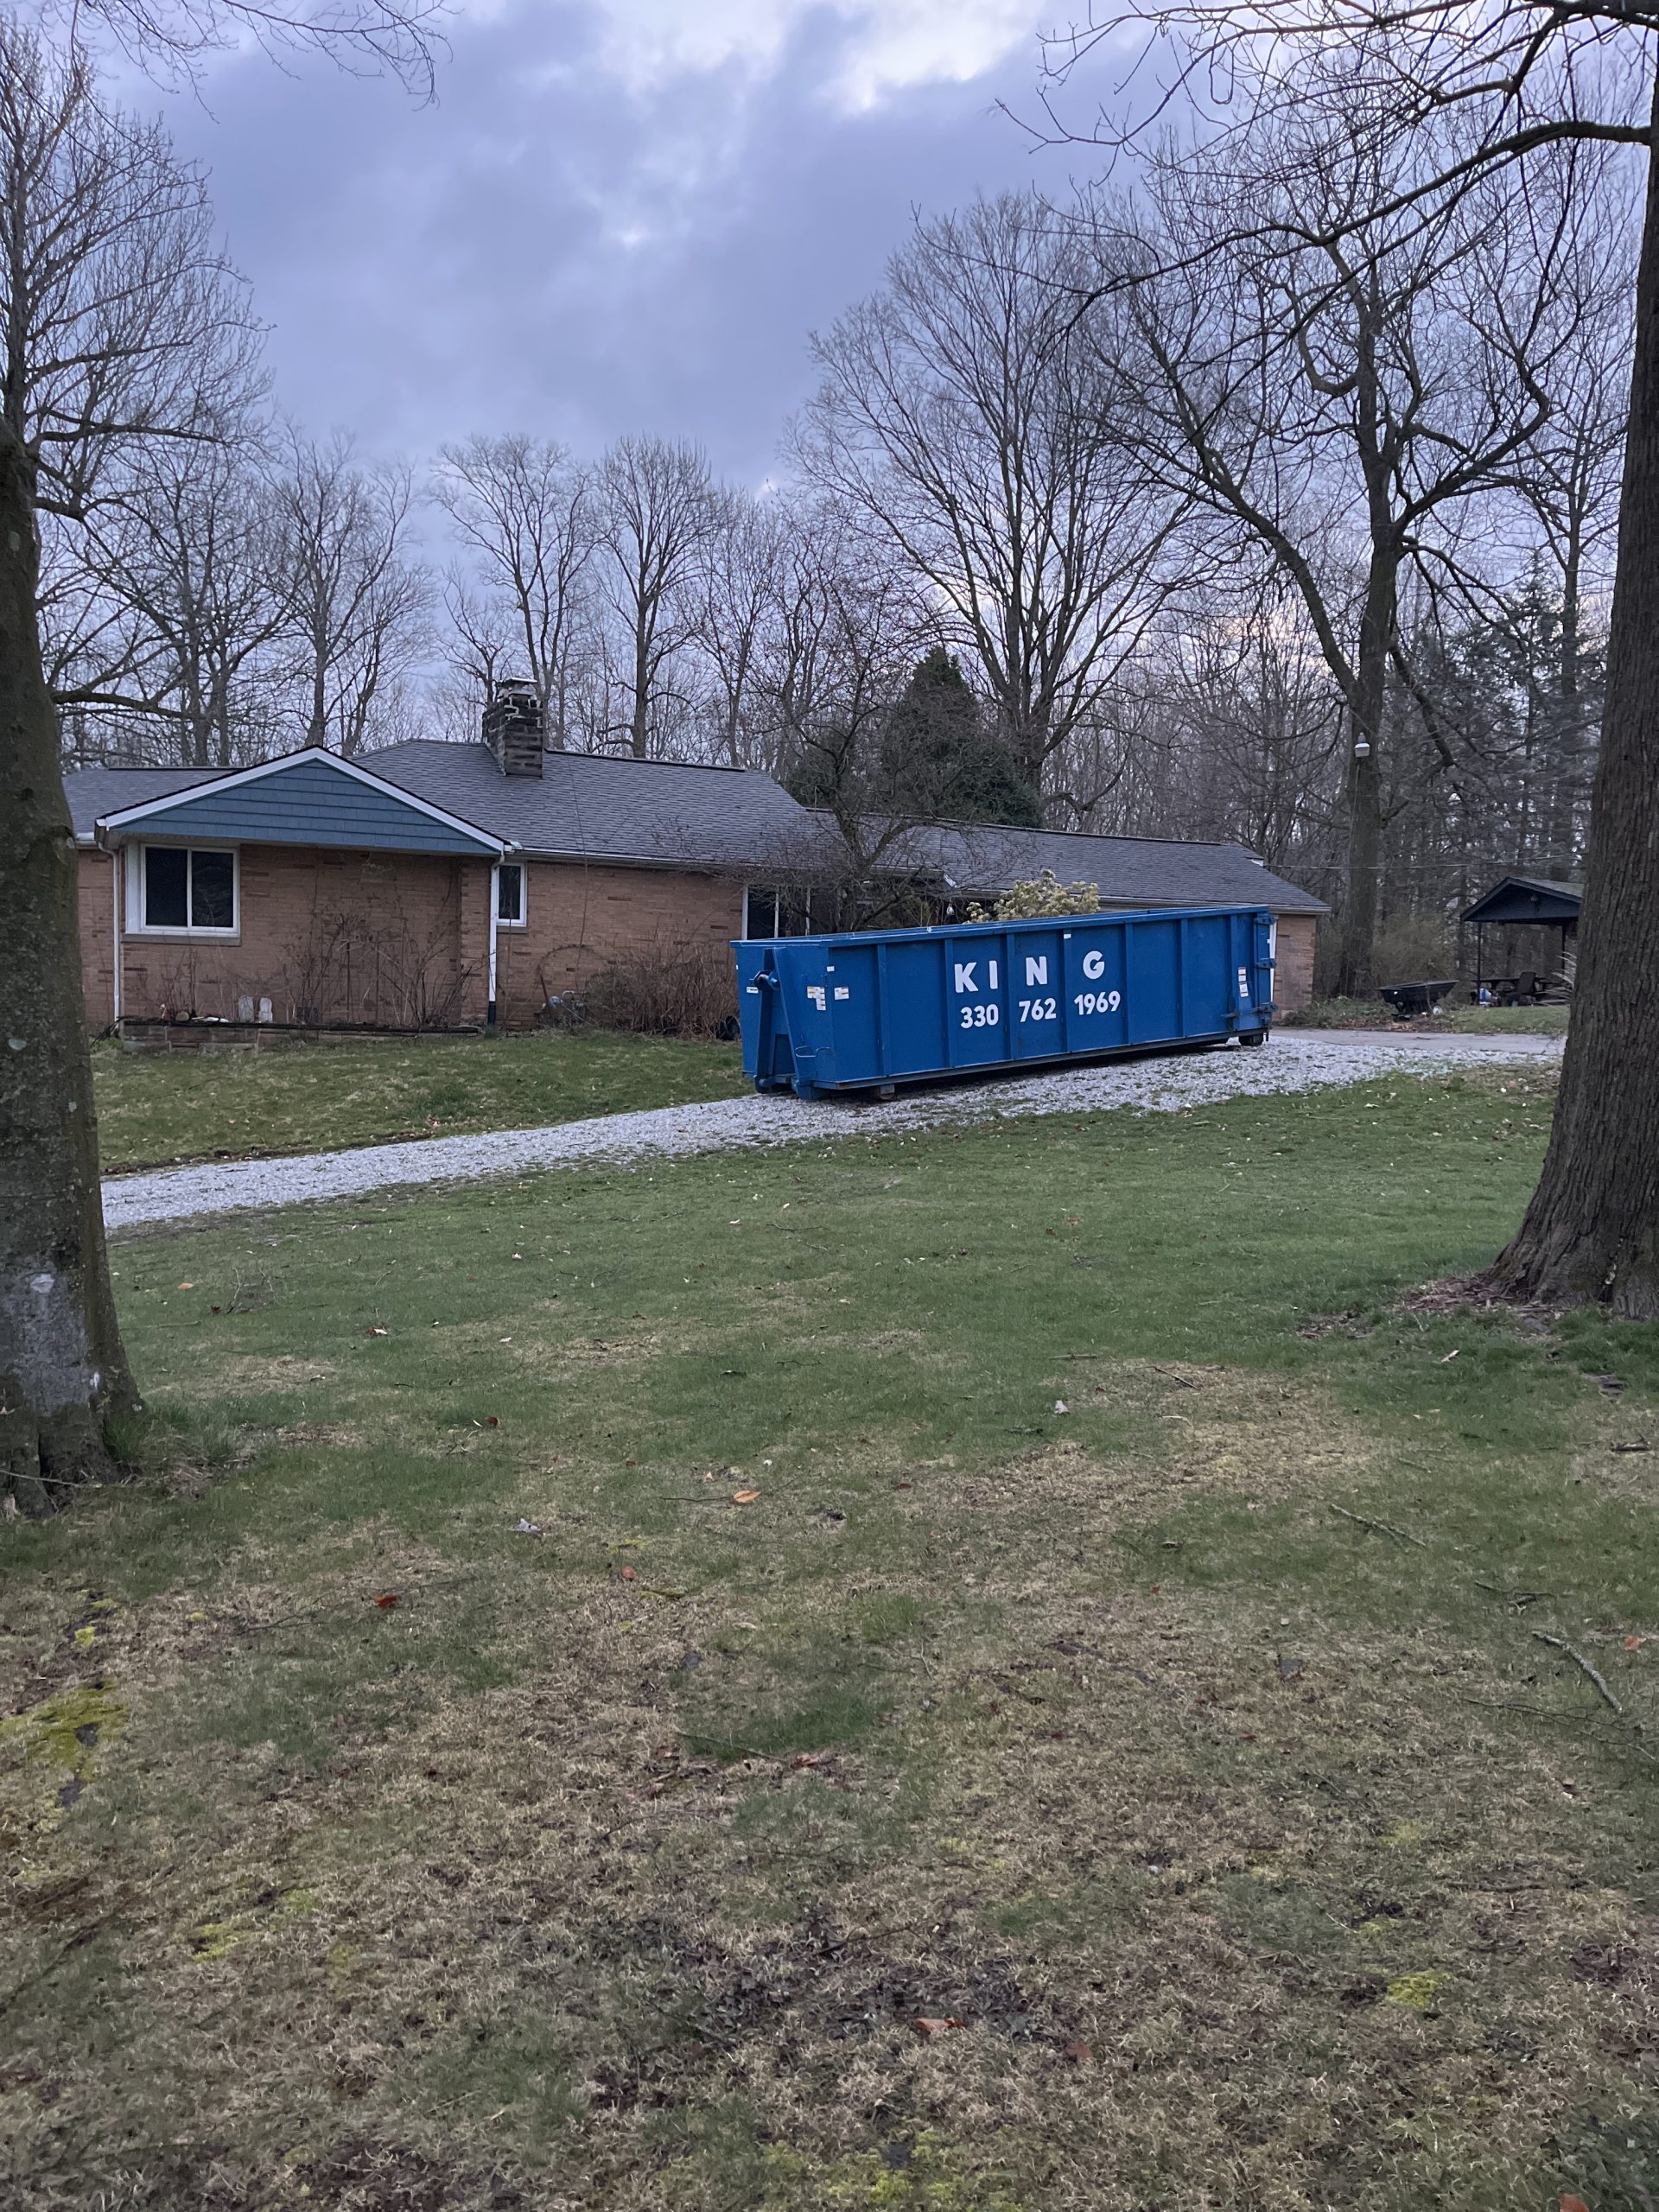 30 yard roll off dumpster in the driveway of a customers home in canton, ohio